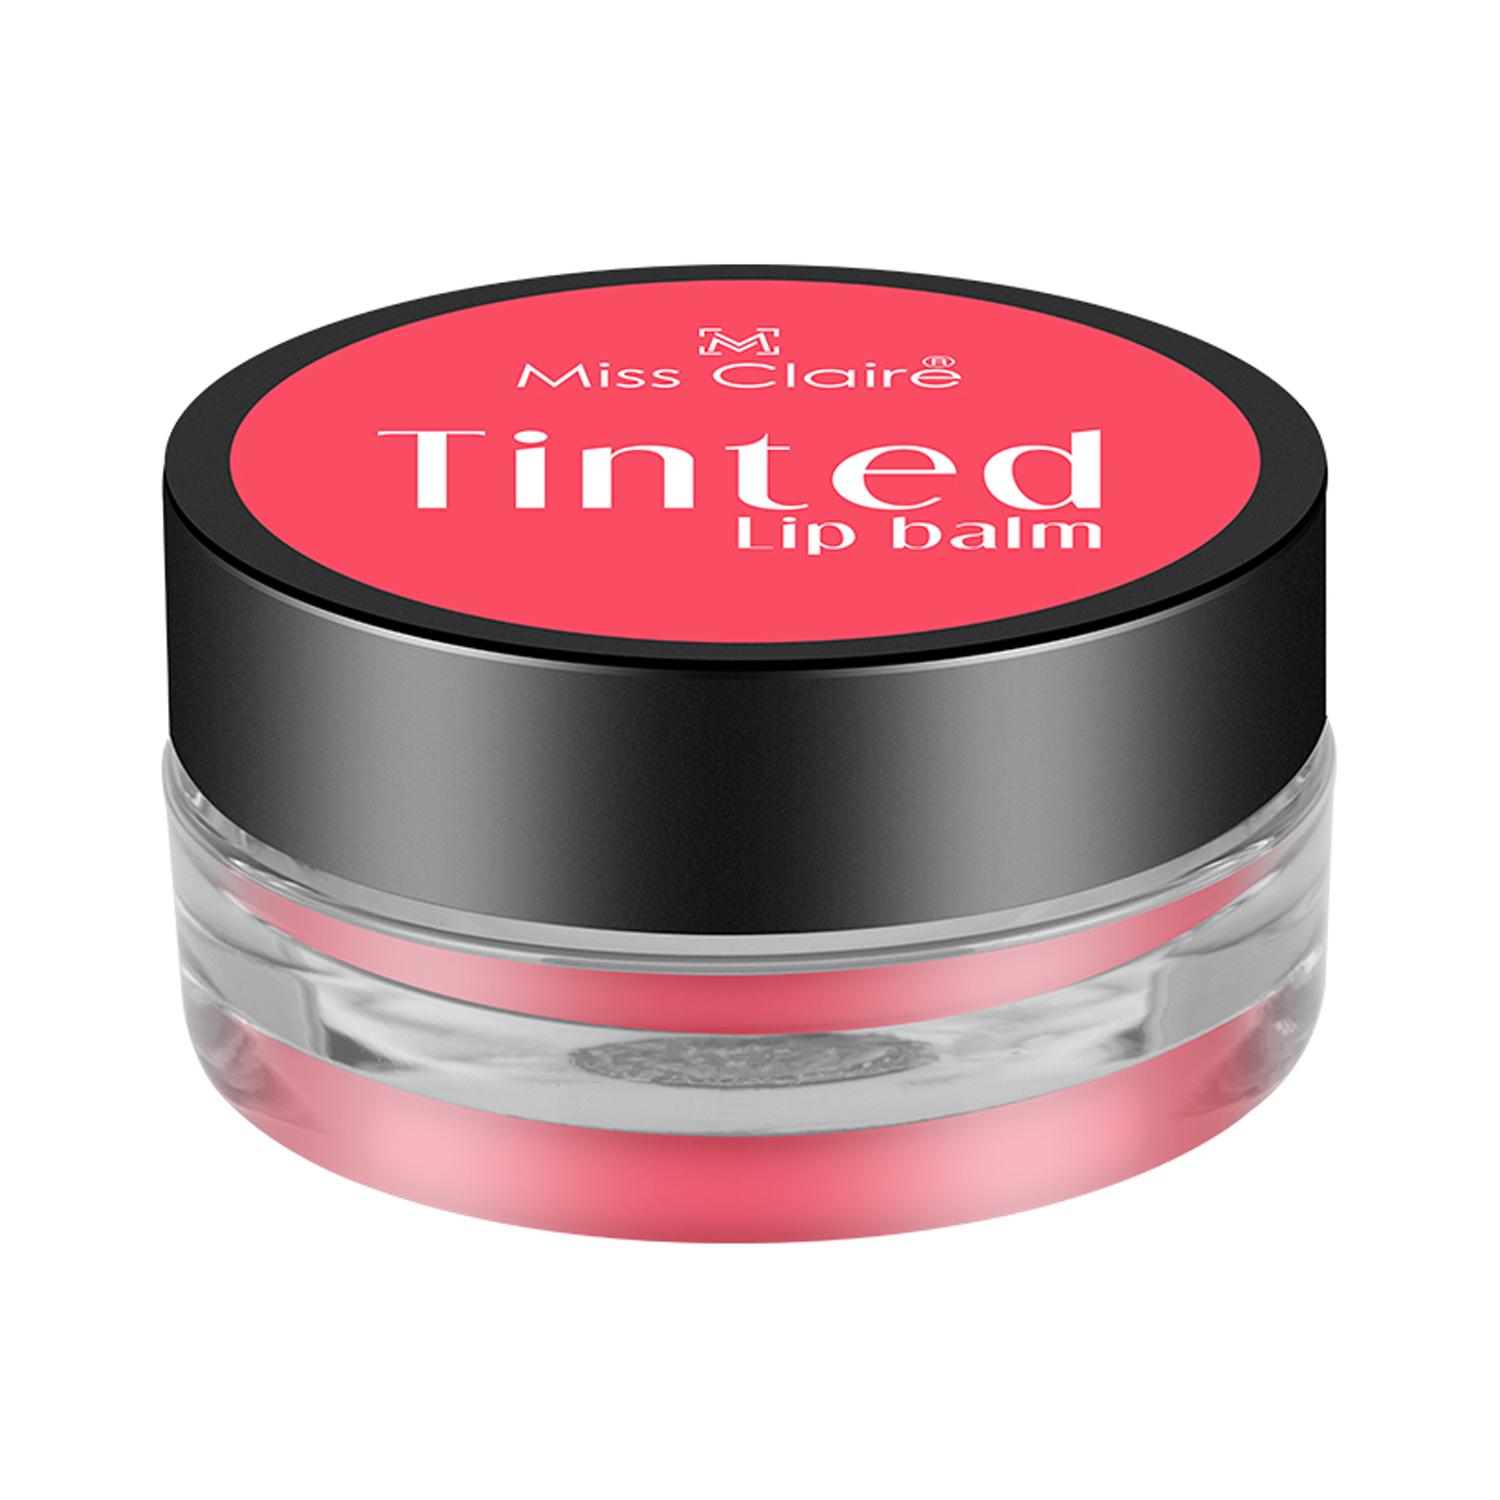 Miss Claire | Miss Claire Tinted Lip Balm - 01 Pink (3g)